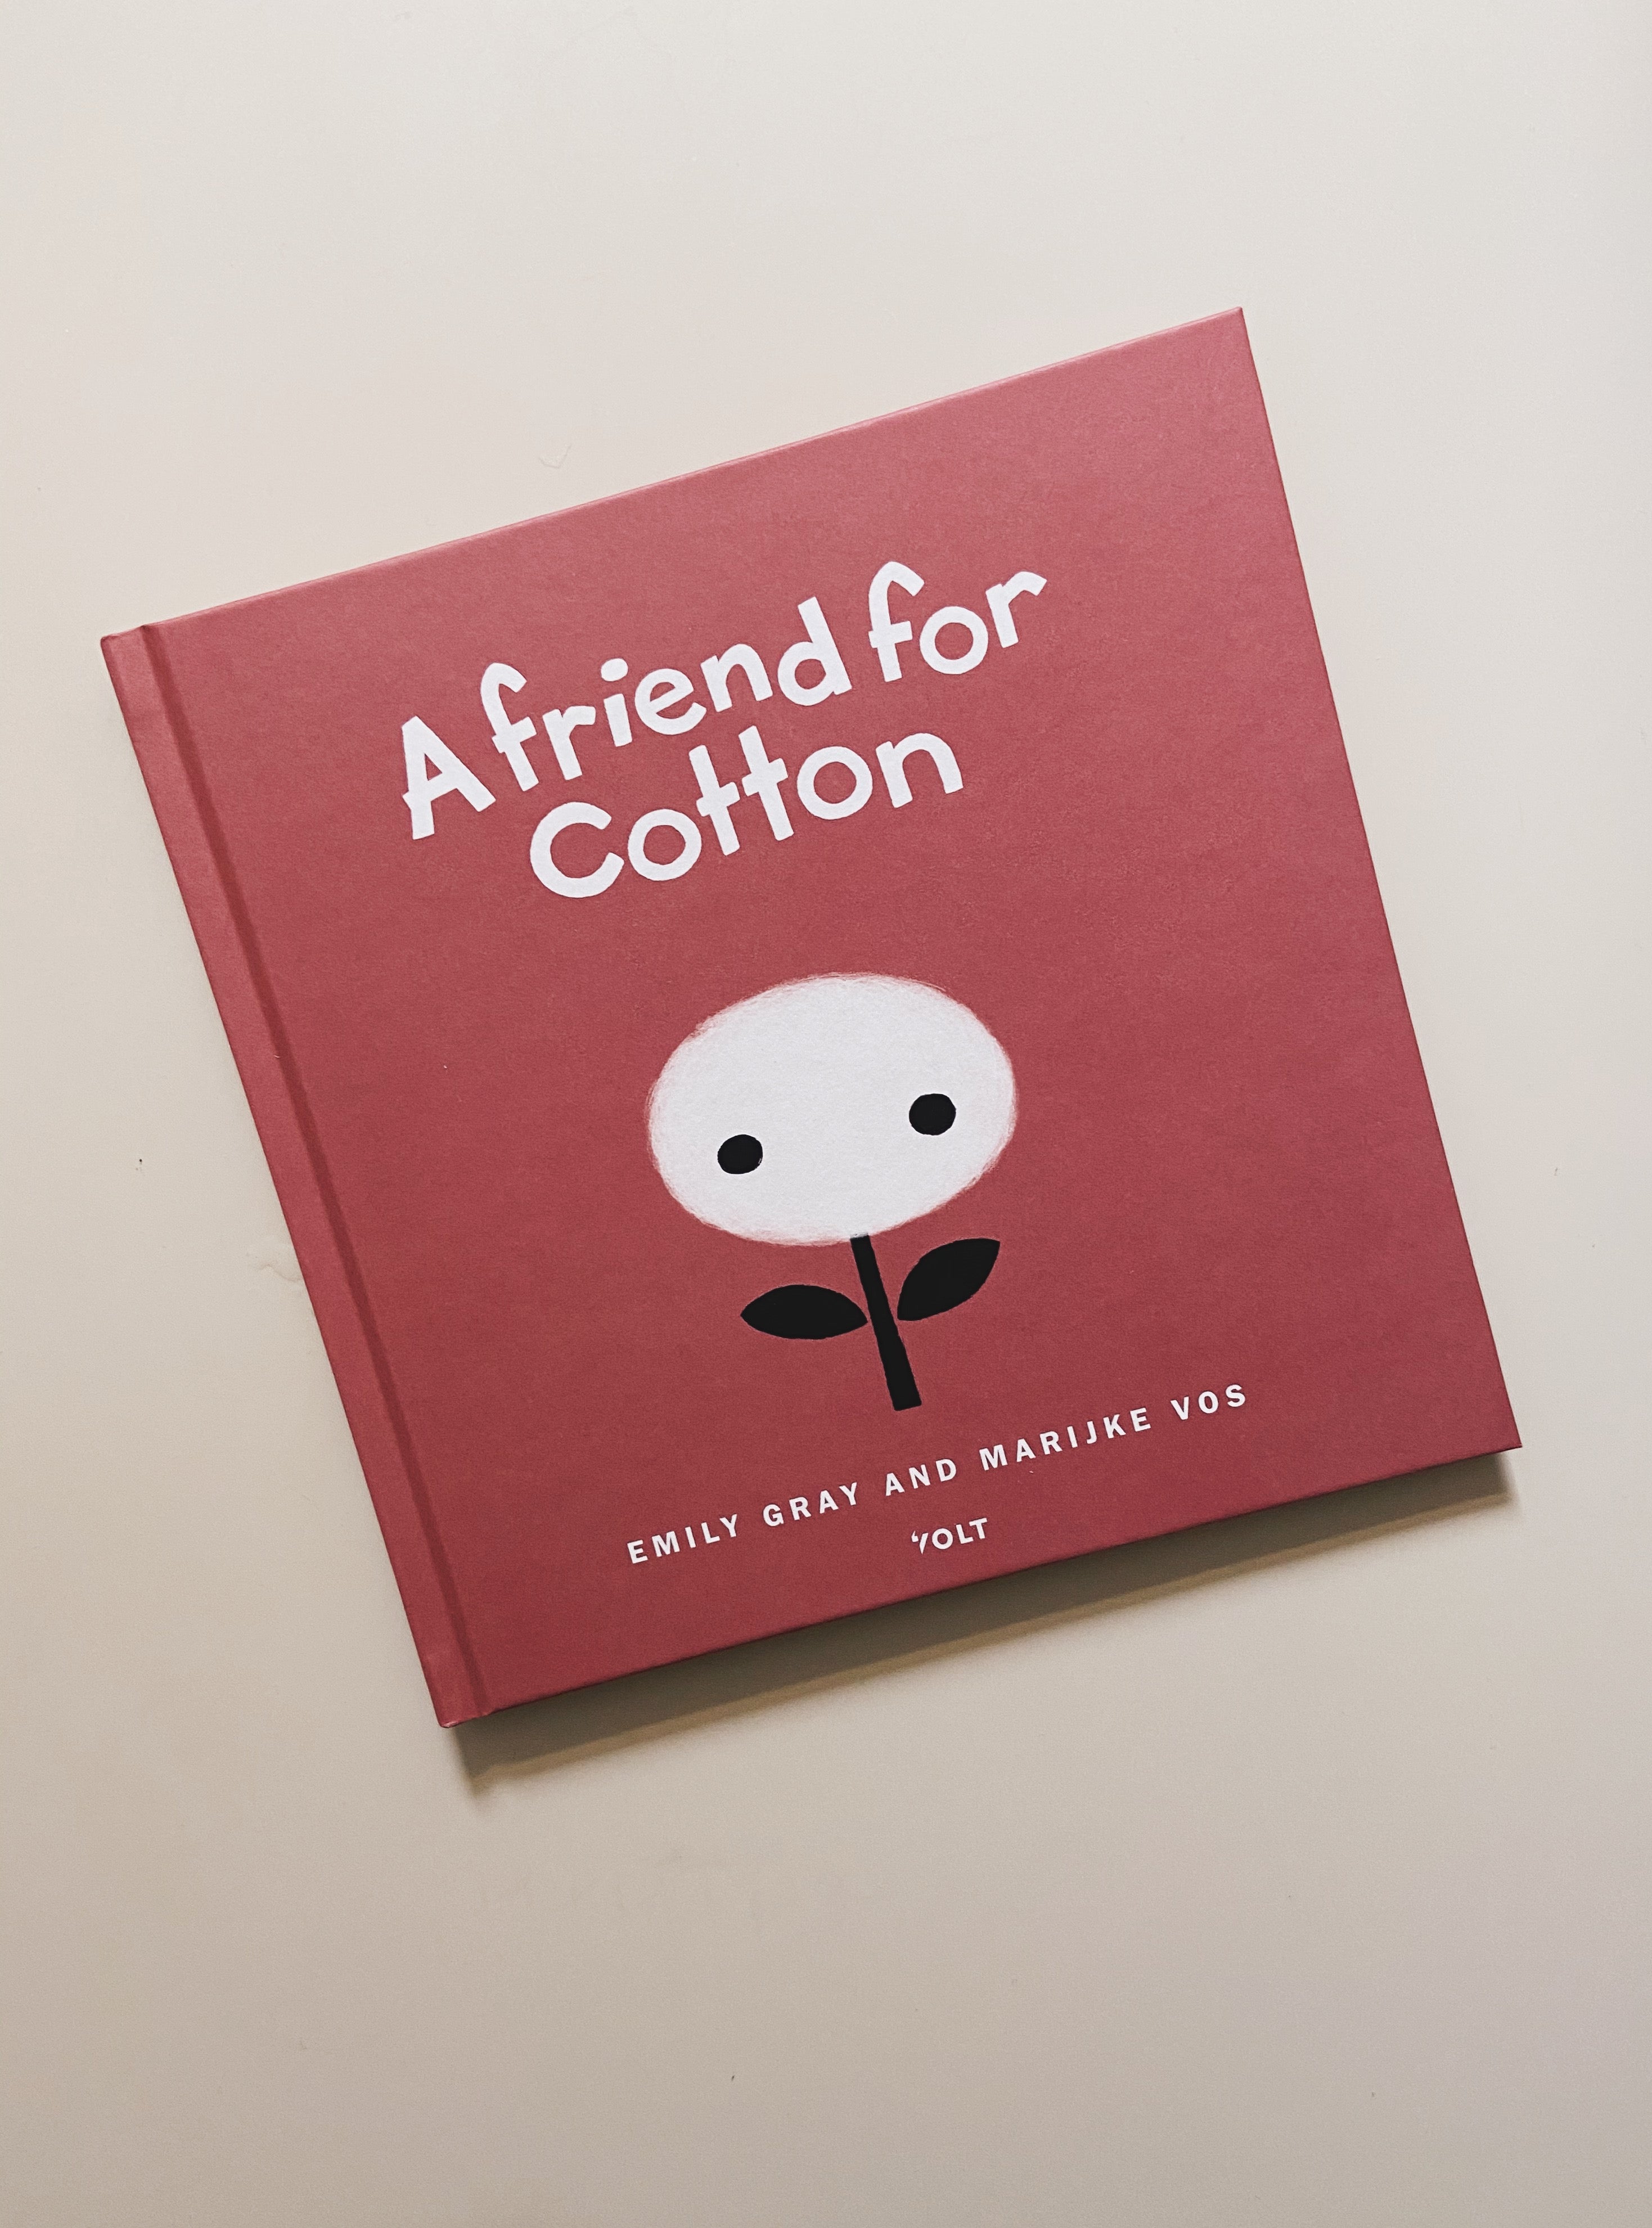 Our book about organic cotton